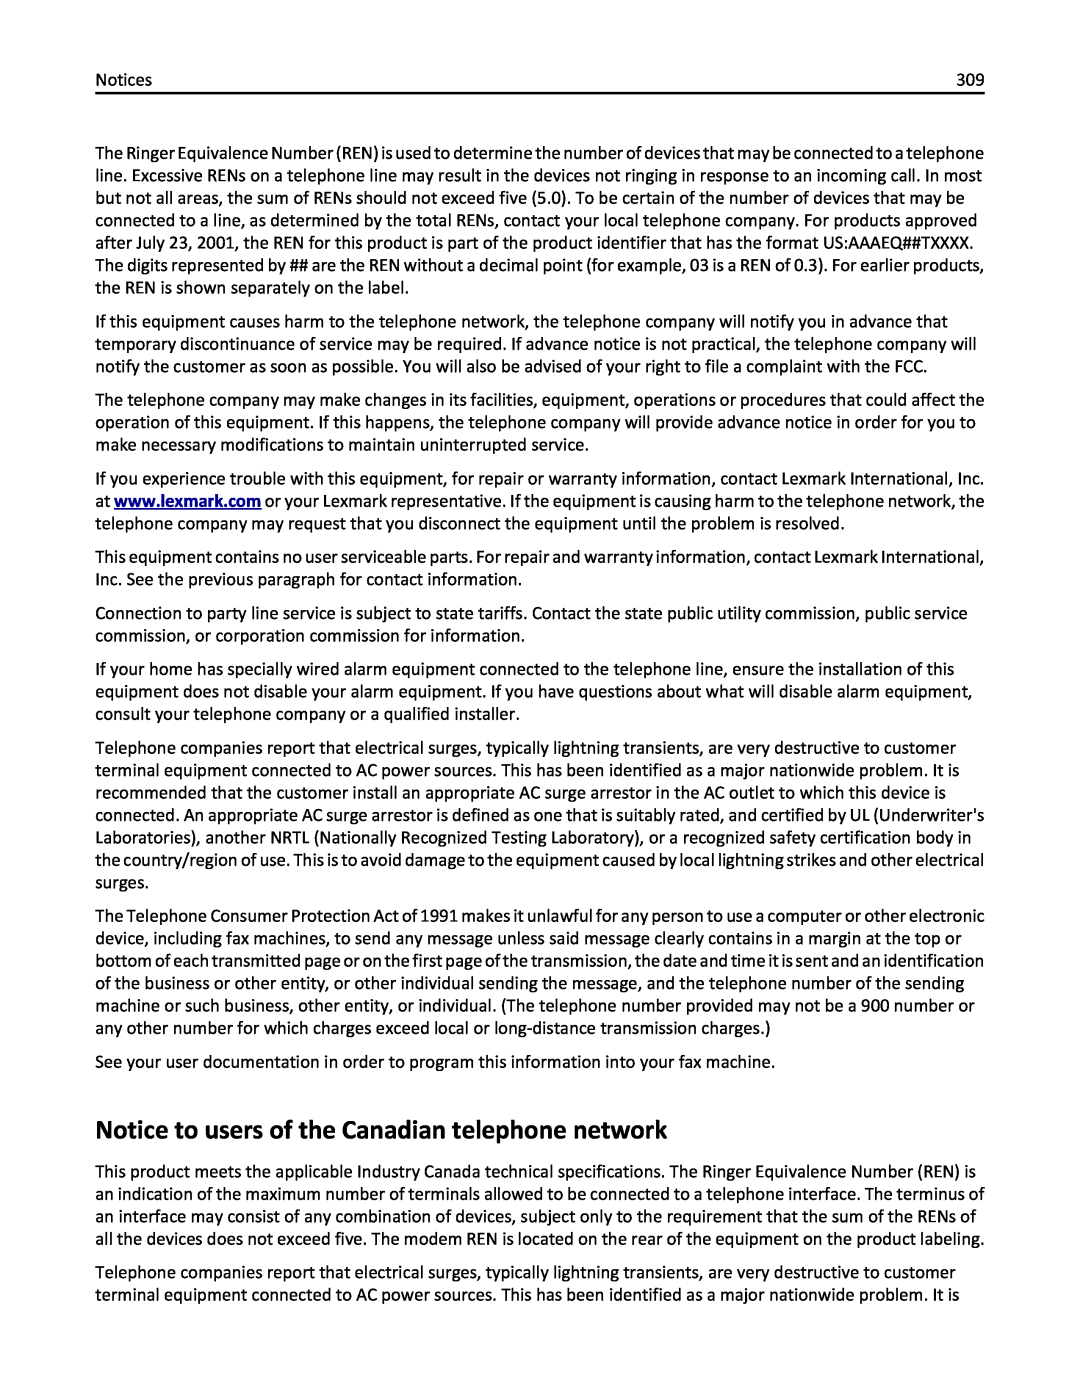 Lexmark 35S5701, 470, 670, 675, MX510, MX410DE manual Notice to users of the Canadian telephone network 